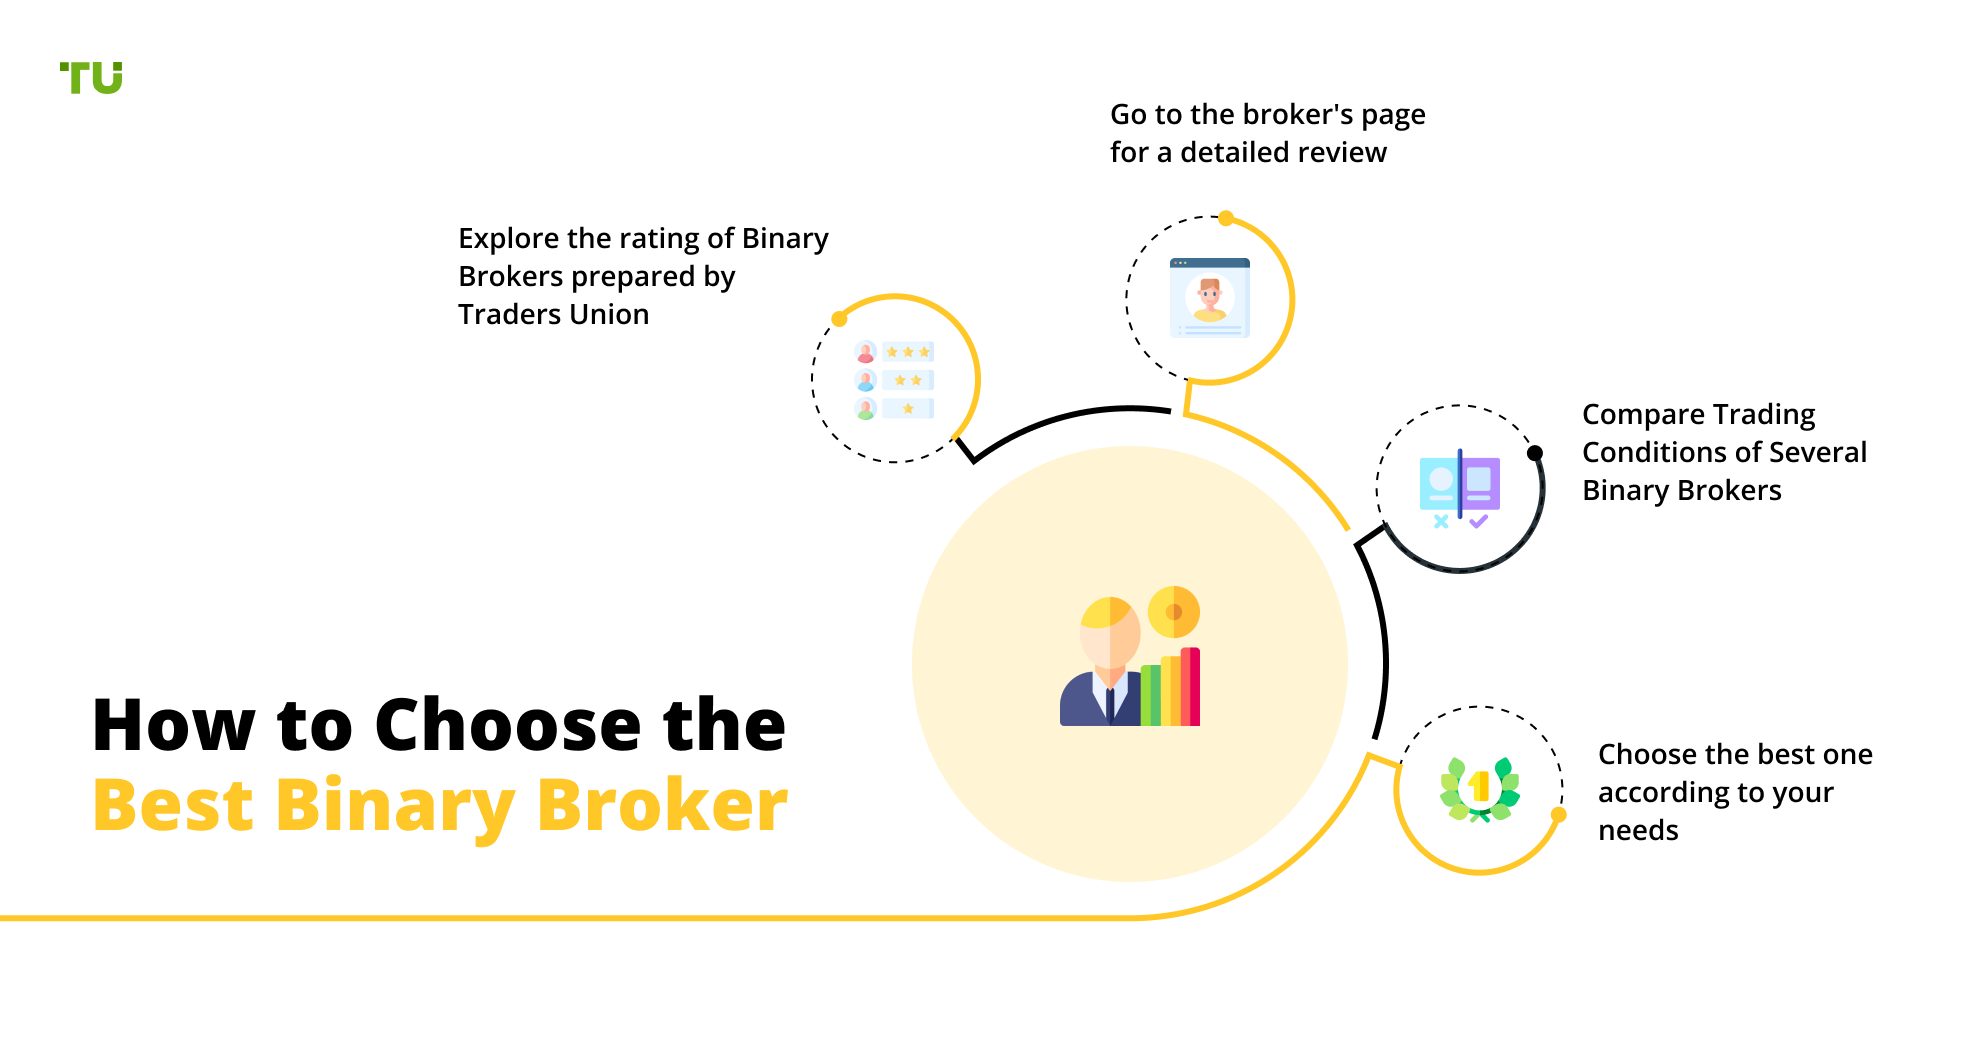 How to Choose the Best Binary Broker